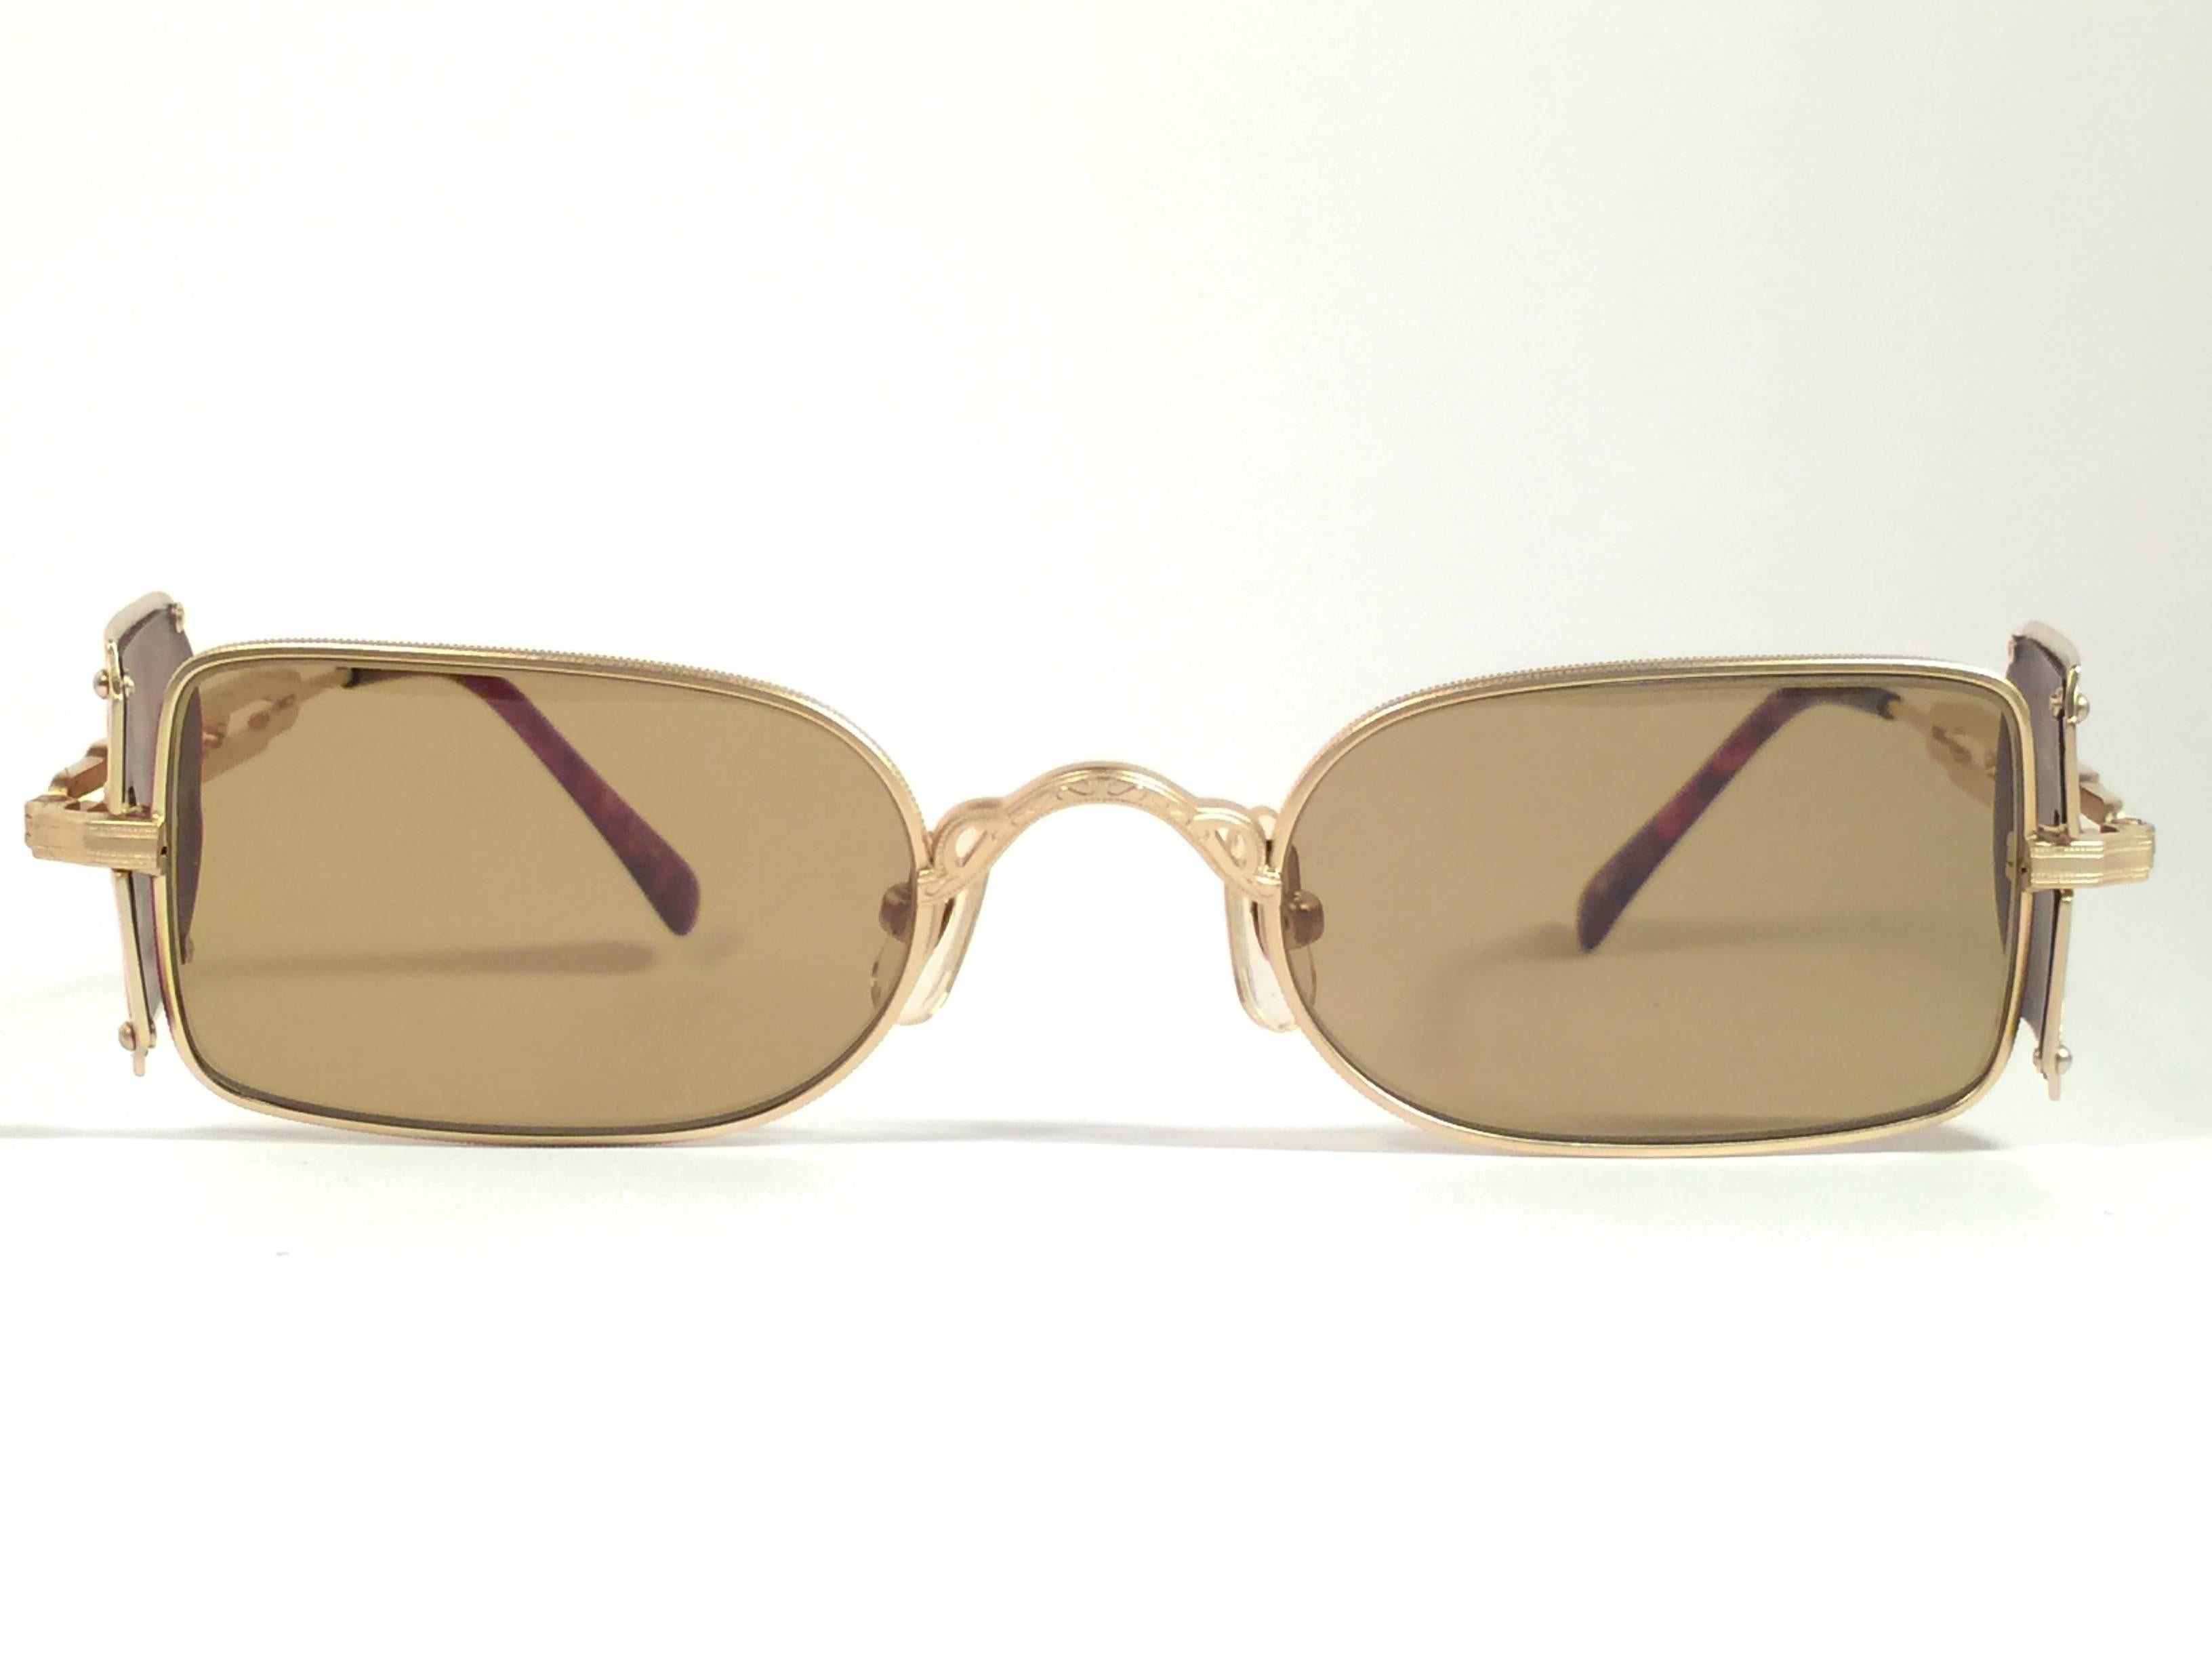 Cult brand Matsuda signed this ultra chic pair of rectangular gold matte frame with intricate detailed side cups sunglasses. 

Spotless medium brown lenses.

Superior quality and design. 

New, never worn or displayed. Made in japan.

MEASUREMENTS